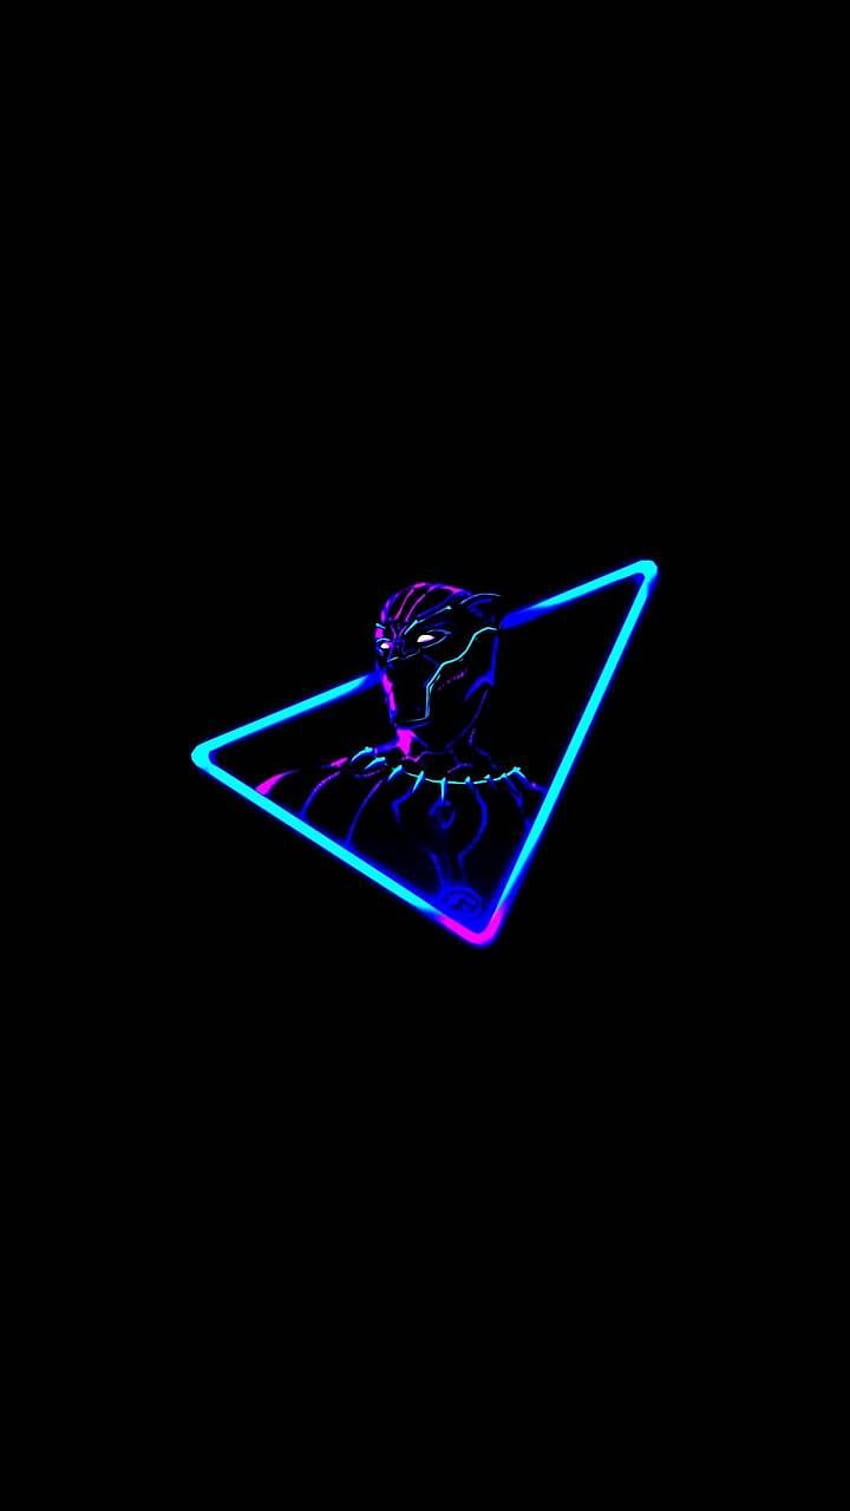 Download Neon lights wallpaper by arsi26 - 7d - Free on ZEDGE™ now. Browse  millions of popular… | Hd dark wallpapers, Decent wallpapers, Black  wallpaper for mobile